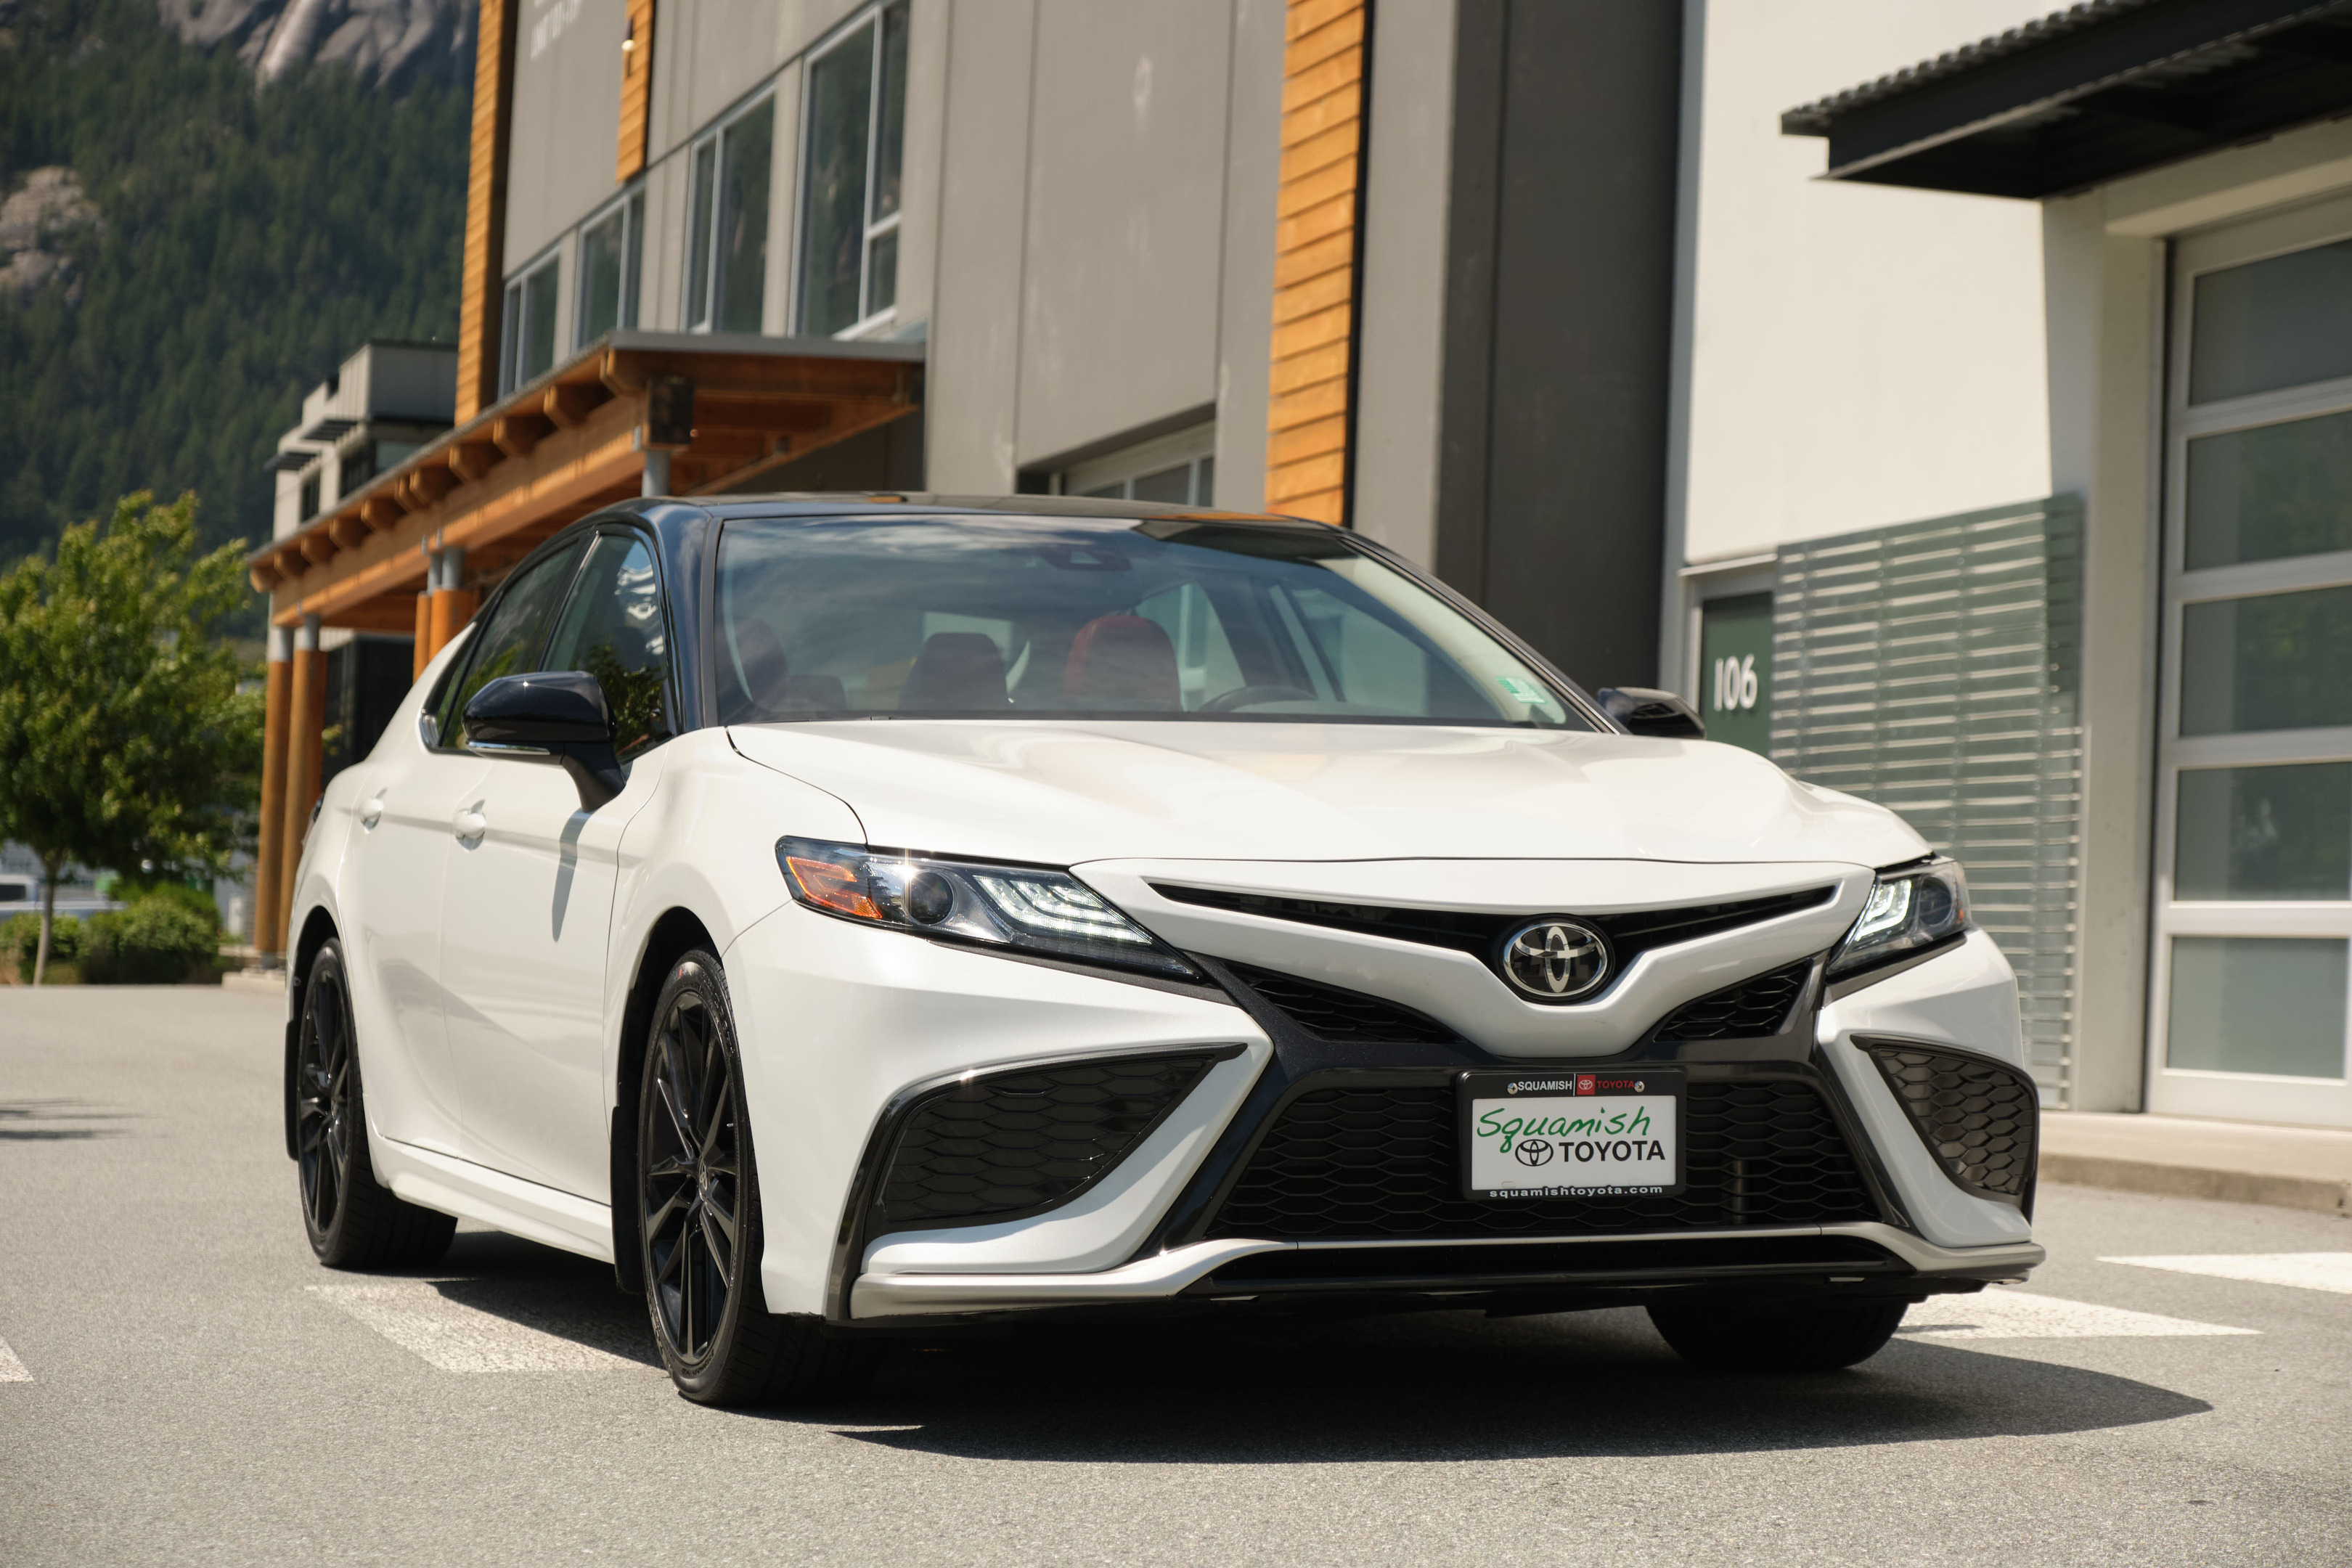 2021 Toyota Camry XSE AWD - Toyota Certified with 24,900 km